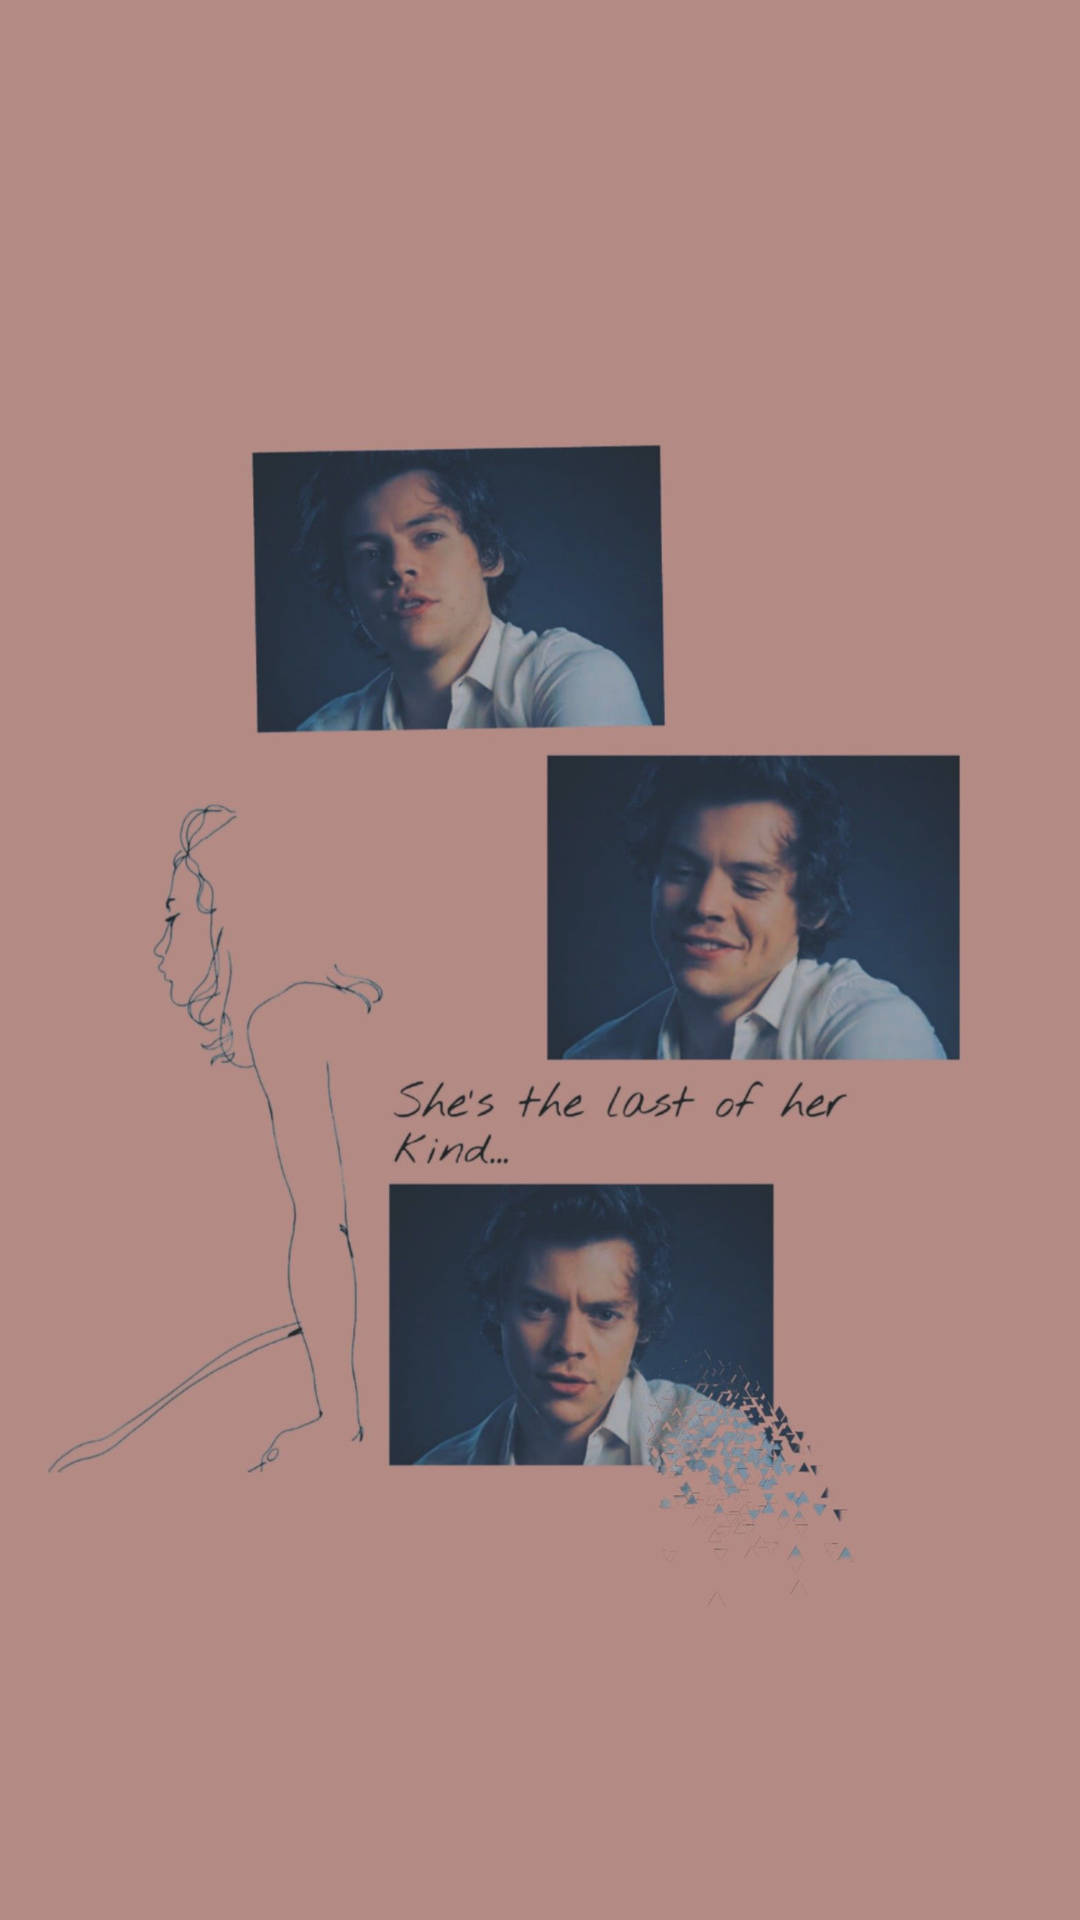 100+] Harry Styles Laptop Wallpapers | Wallpapers.com